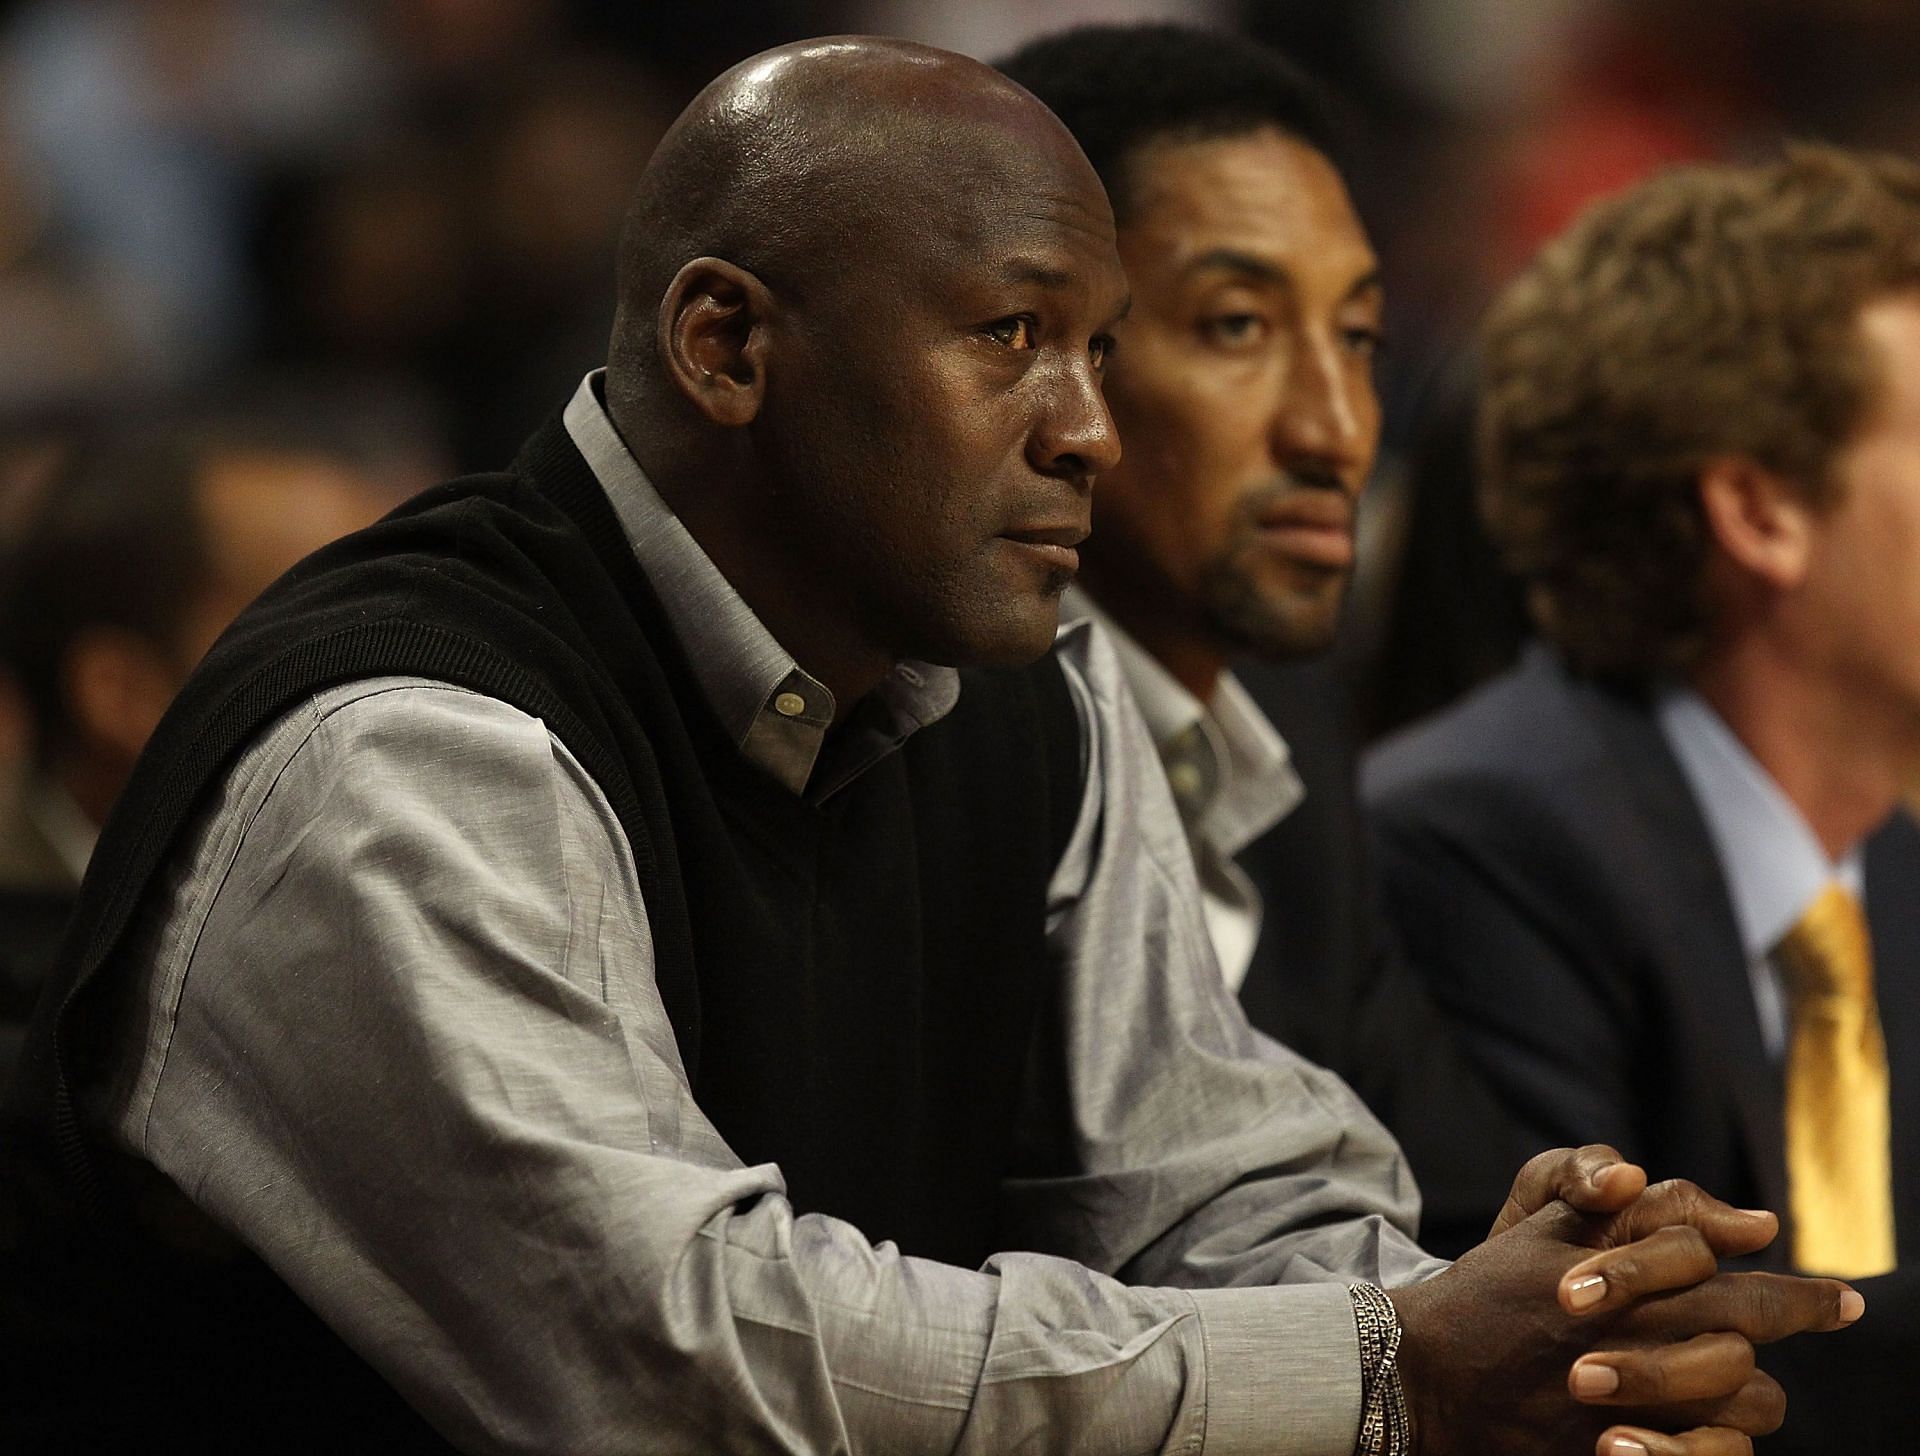 MJ and Pipppen at a Chicago Bulls game